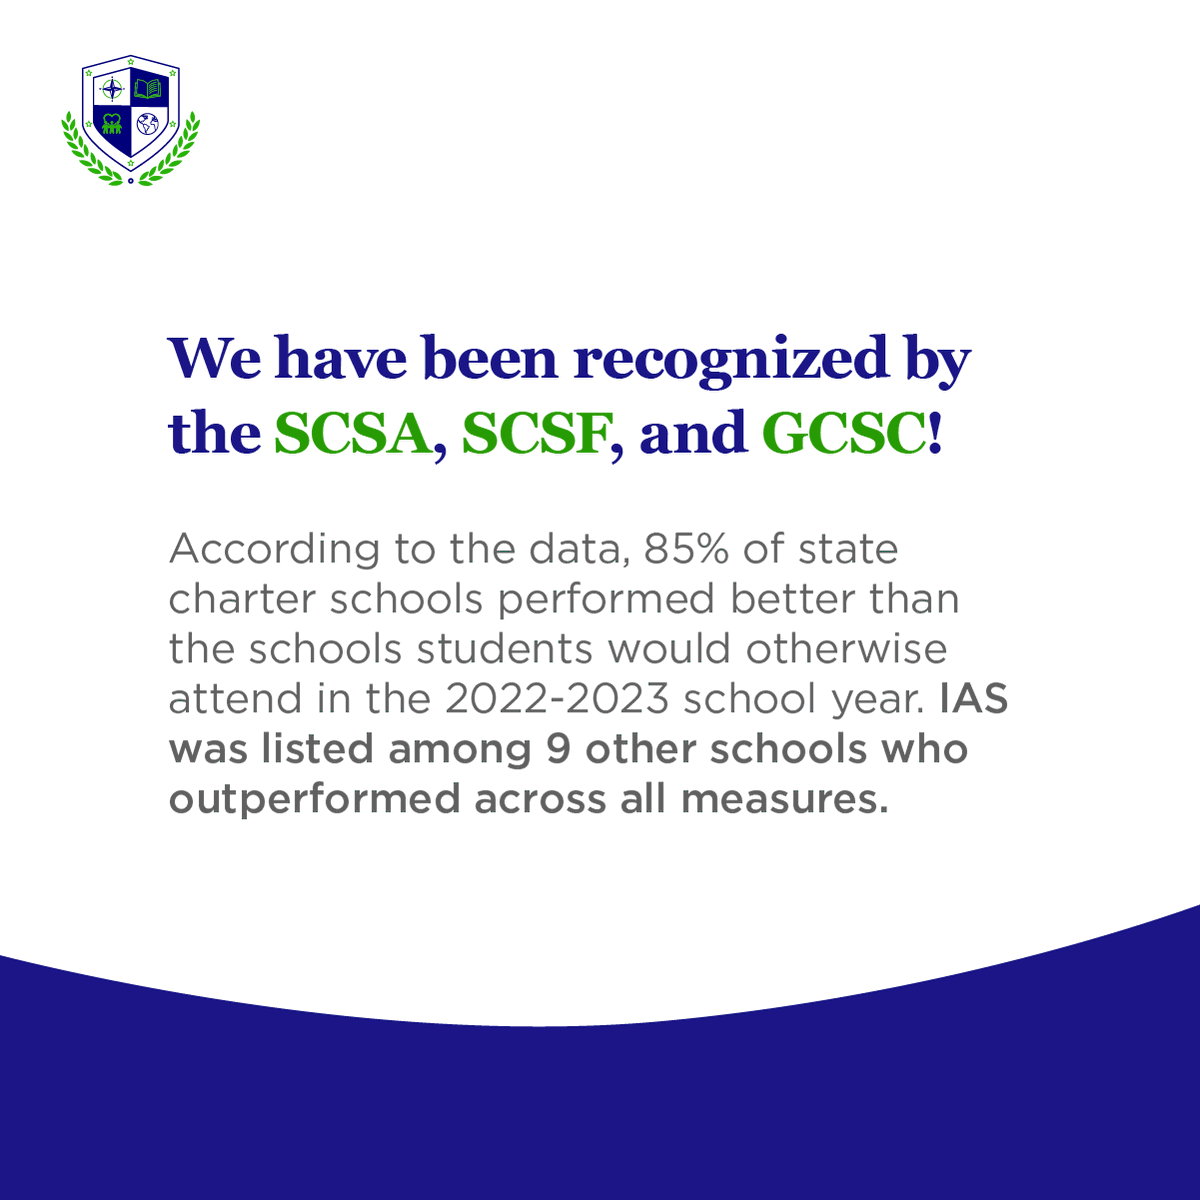 We are proud to share how we are exceeding expectations academically! 

#iasmyrna #iasstrong #charterschool #tuitionfree #free #education #community #internationalstudies